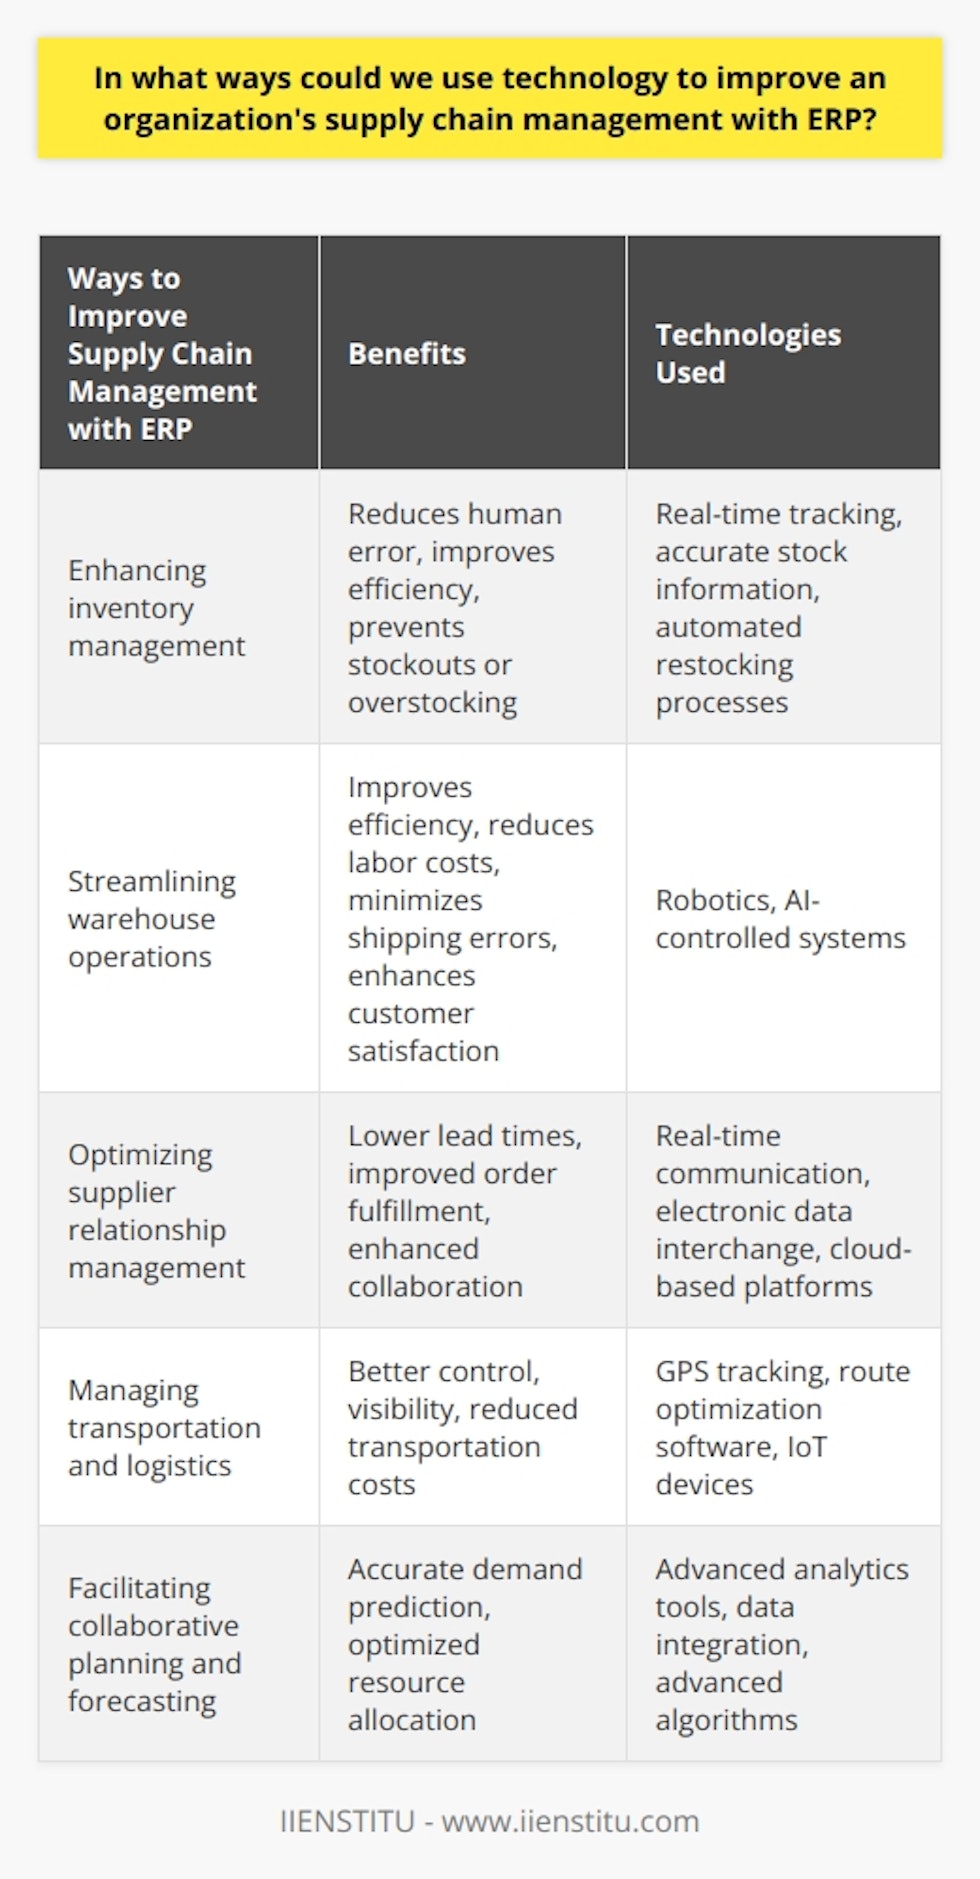 Using technology to improve an organization's supply chain management with ERP can be done in various ways. One way is by enhancing inventory management through real-time tracking of inventory levels, accurate stock information, and automated restocking processes. This reduces human error, improves efficiency, and prevents stockouts or overstocking. Another application is streamlining warehouse operations using advanced automation tools like robotics and AI-controlled systems. These tools improve efficiency, reduce labor costs, and minimize shipping errors, resulting in better customer satisfaction. Technology also enables organizations to optimize supplier relationship management by maintaining real-time communication with suppliers. This facilitates information exchange, contract negotiations, and issue resolution, leading to lower lead times and improved order fulfillment. Electronic data interchange and cloud-based platforms enhance collaboration among supply-chain partners. Advancements in transportation and logistics management technology significantly impact supply chain efficiency. GPS tracking, route optimization software, and IoT devices allow real-time monitoring of shipments and delivery vehicles, providing better control, visibility, and reduced transportation costs. Data collected from these technologies can be analyzed to identify patterns and trends for informed decision-making and predictive analytics. Facilitating collaborative planning and forecasting is essential for effective supply chain management. Technology solutions, such as advanced analytics tools, help organizations predict customer demand, plan production schedules, and optimize resource allocation accurately. Integrating data from multiple sources and applying advanced algorithms enable organizations to make informed decisions and anticipate market changes. In conclusion, leveraging technology in supply chain management with ERP improves inventory management, streamlines warehouse operations, optimizes supplier relationships, manages transportation and logistics, and facilitates collaborative planning and forecasting. By utilizing these technological tools and solutions, organizations can enhance their supply chain performance, reduce costs, and gain a competitive advantage.